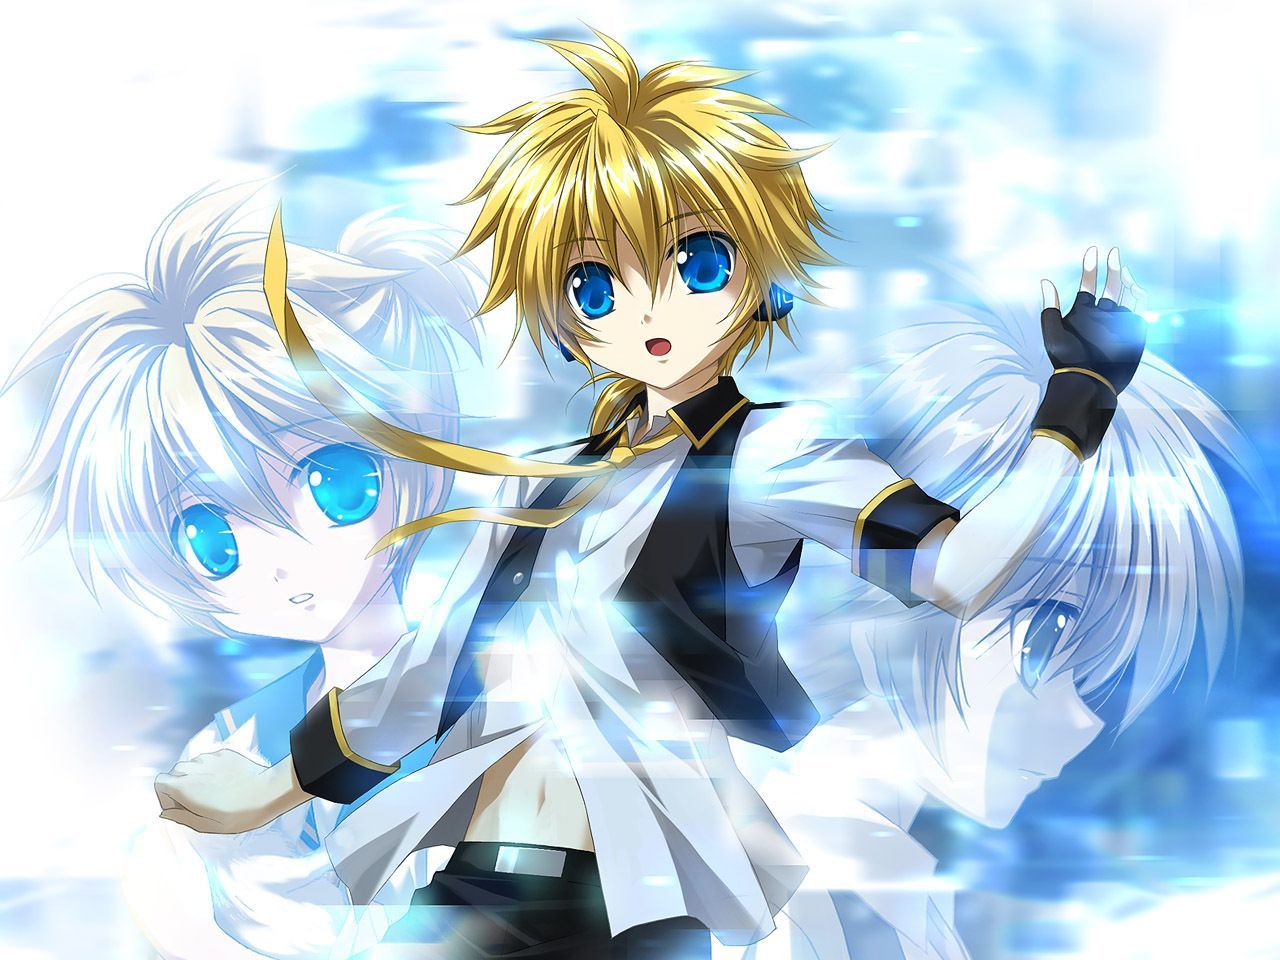 Anime boy with blonde hair and blue eyes with a girl with white hair and blue eyes - 